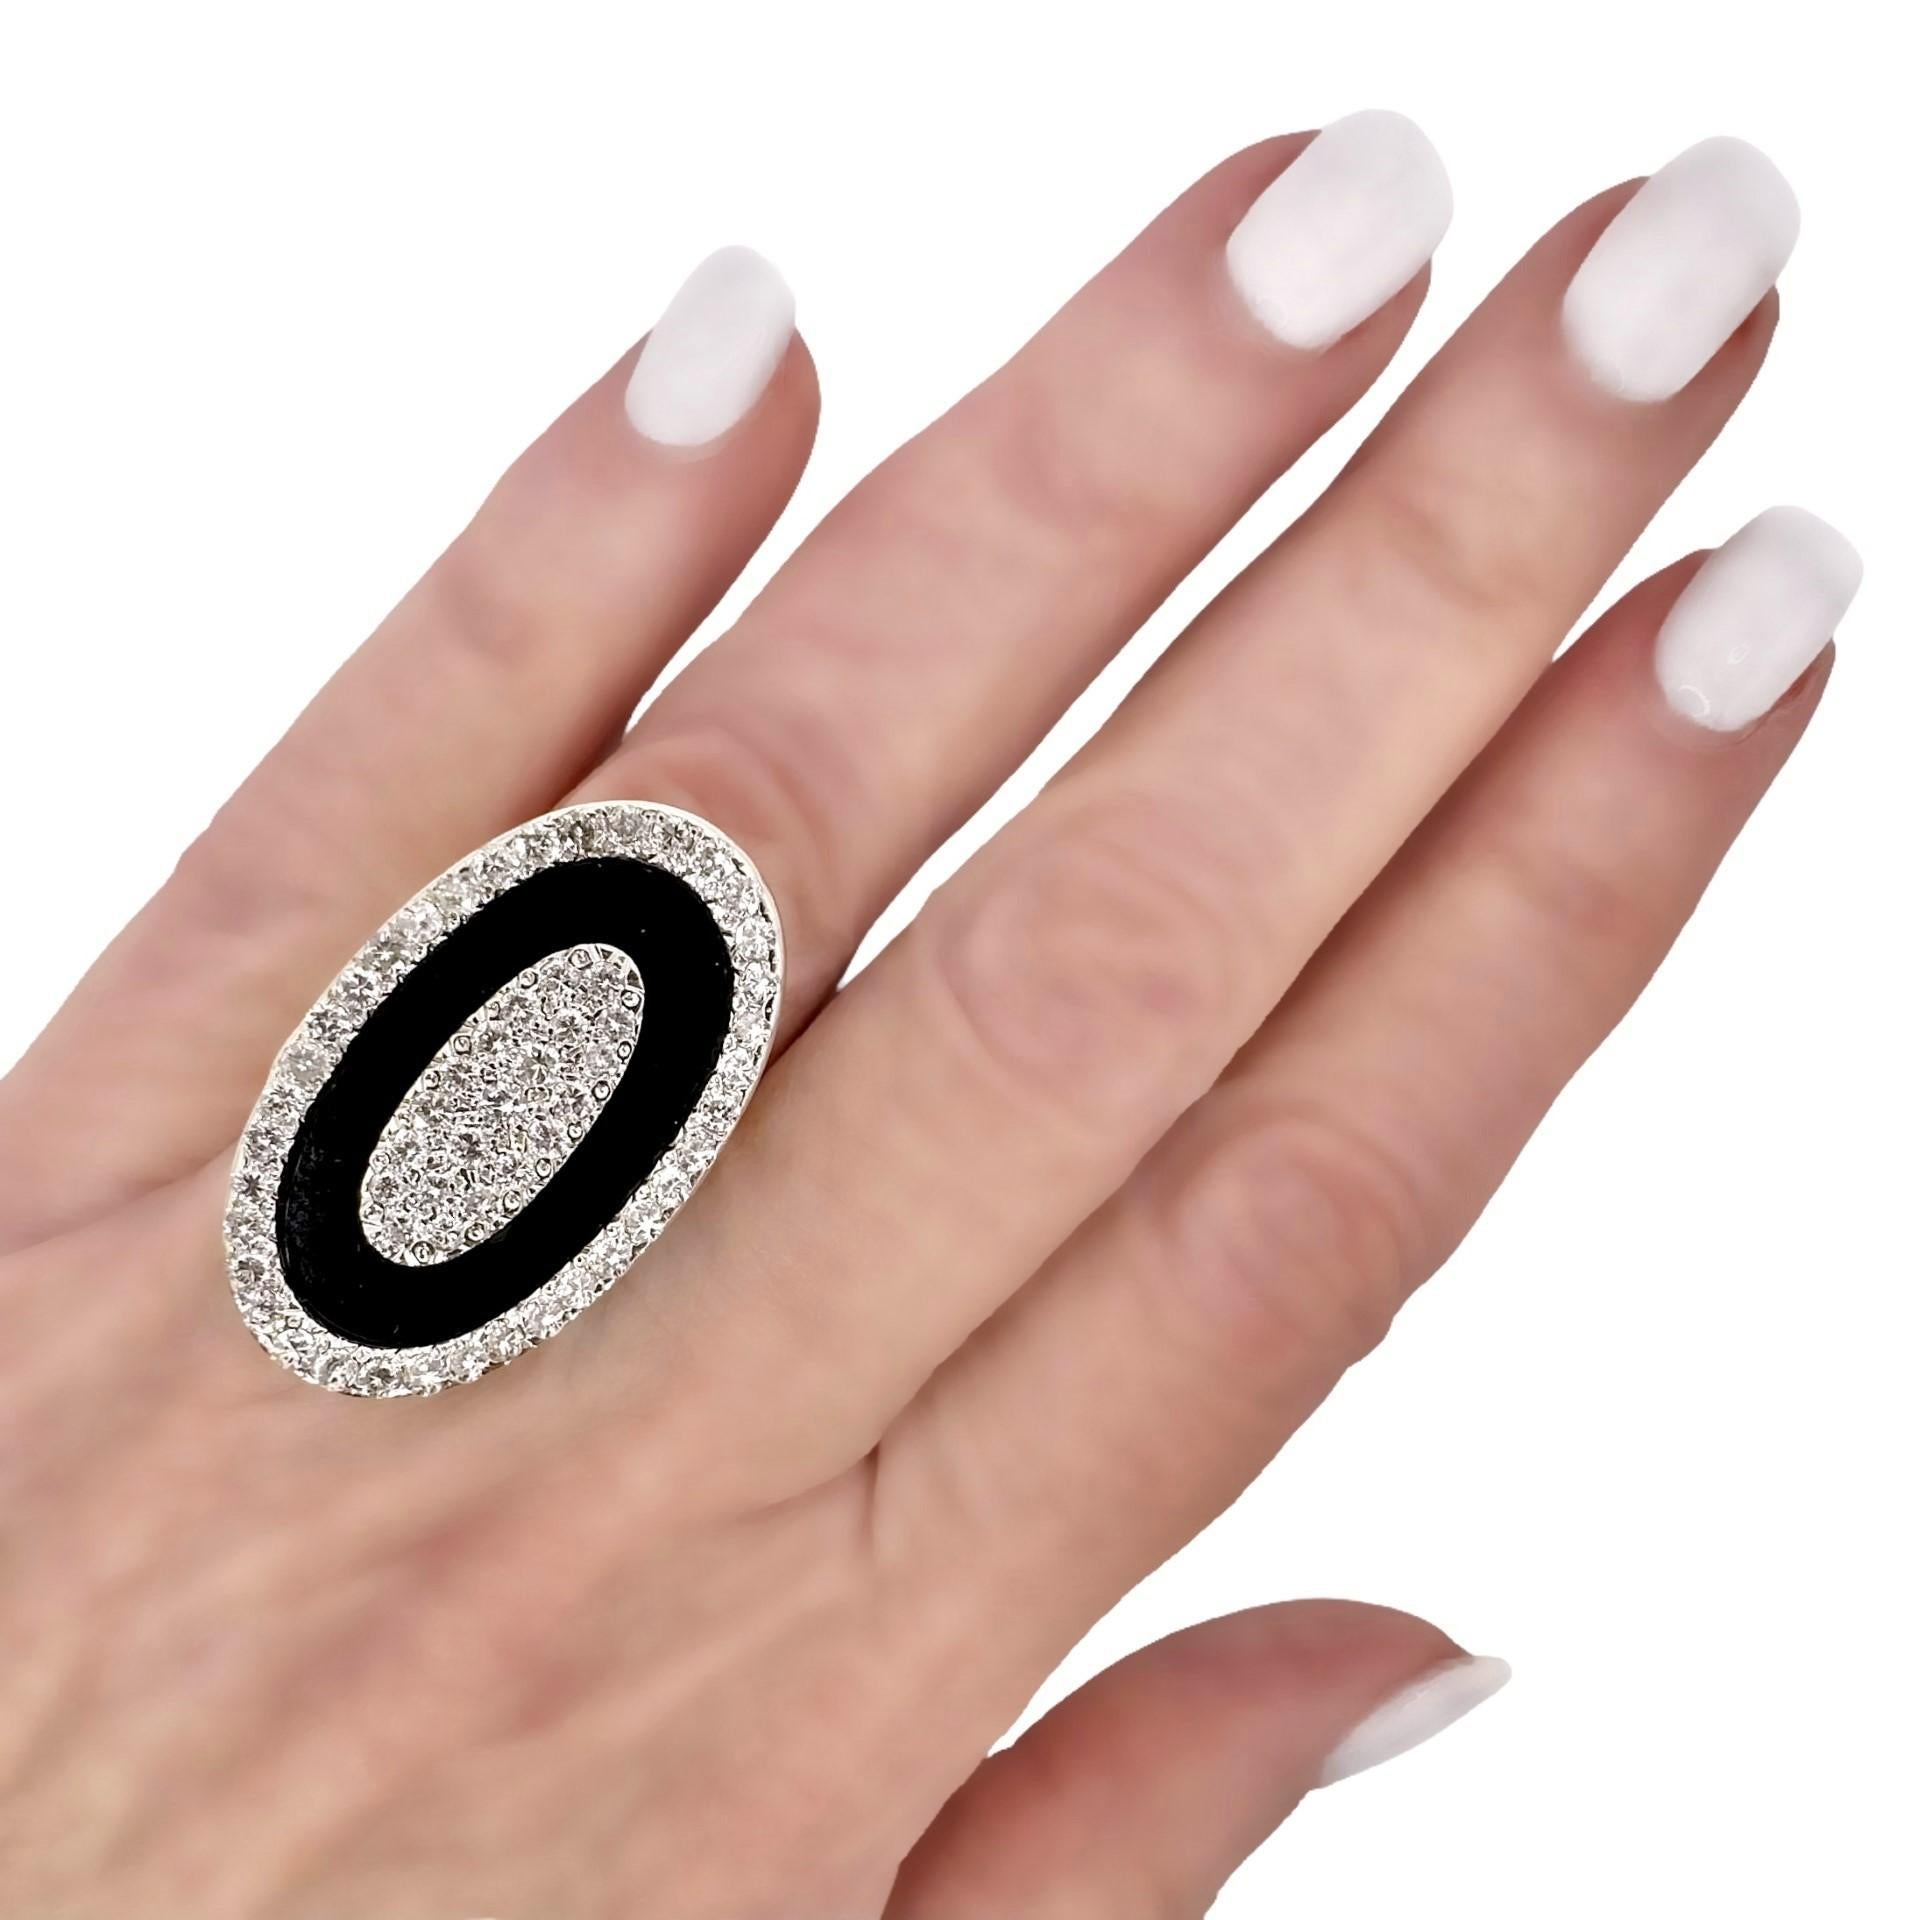 Onyx, Diamond and 18K Gold, Oval Shaped Ring, 1.25 Inches Long by .75 Inch Wide For Sale 3